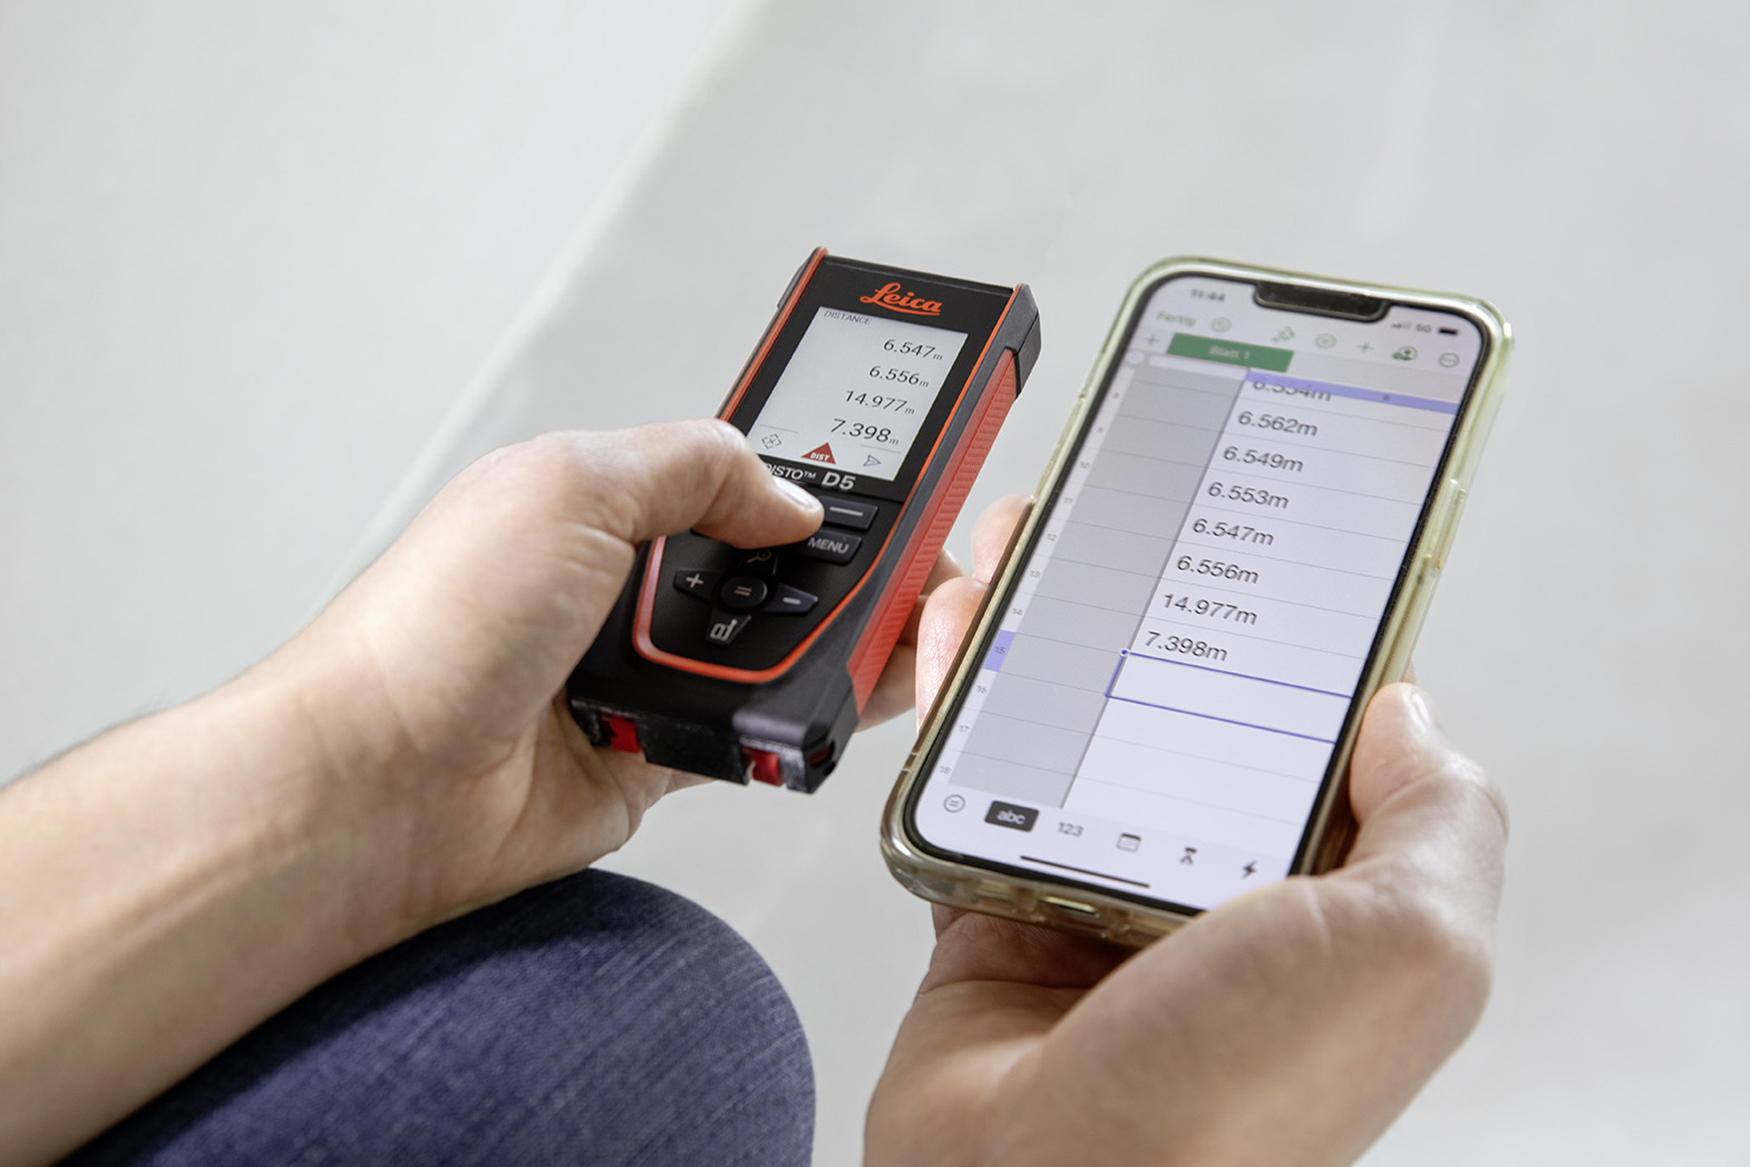 Leica DISTO D5 laser measure with measurement results in the display. The same measurement results appear in the table on the smart phone 